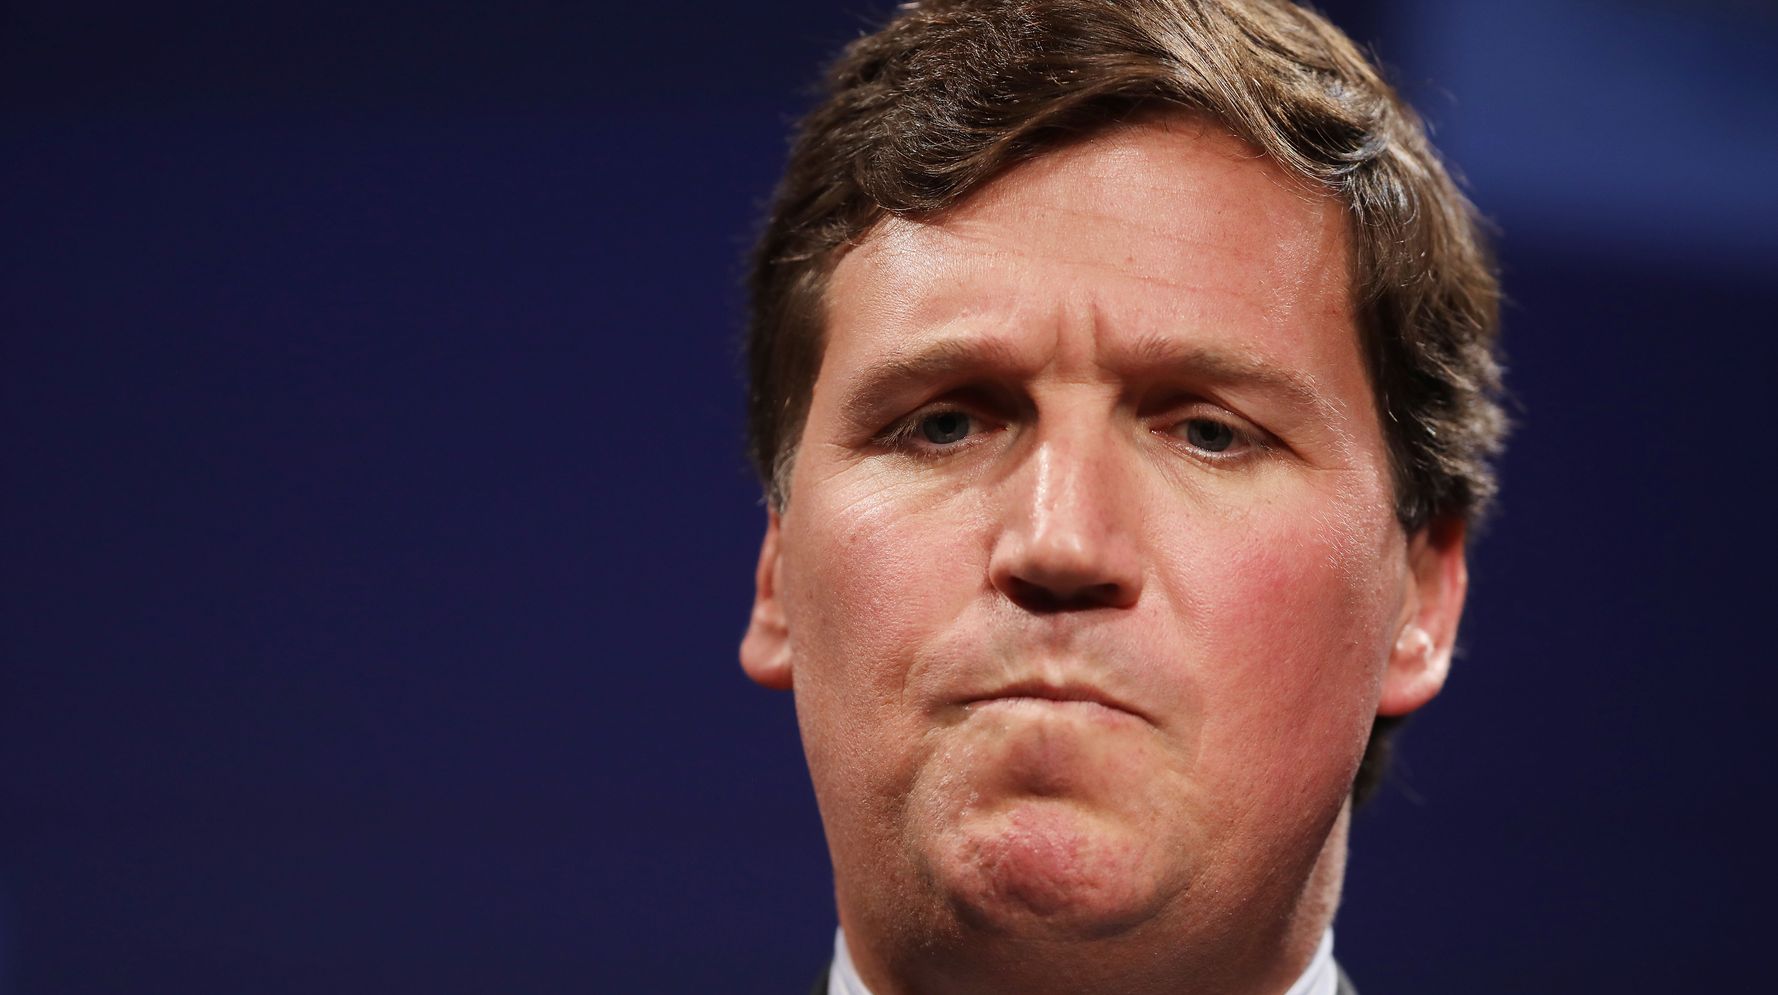 Tucker Carlson's College Yearbook Entry Goes Viral, And It's A Doozy